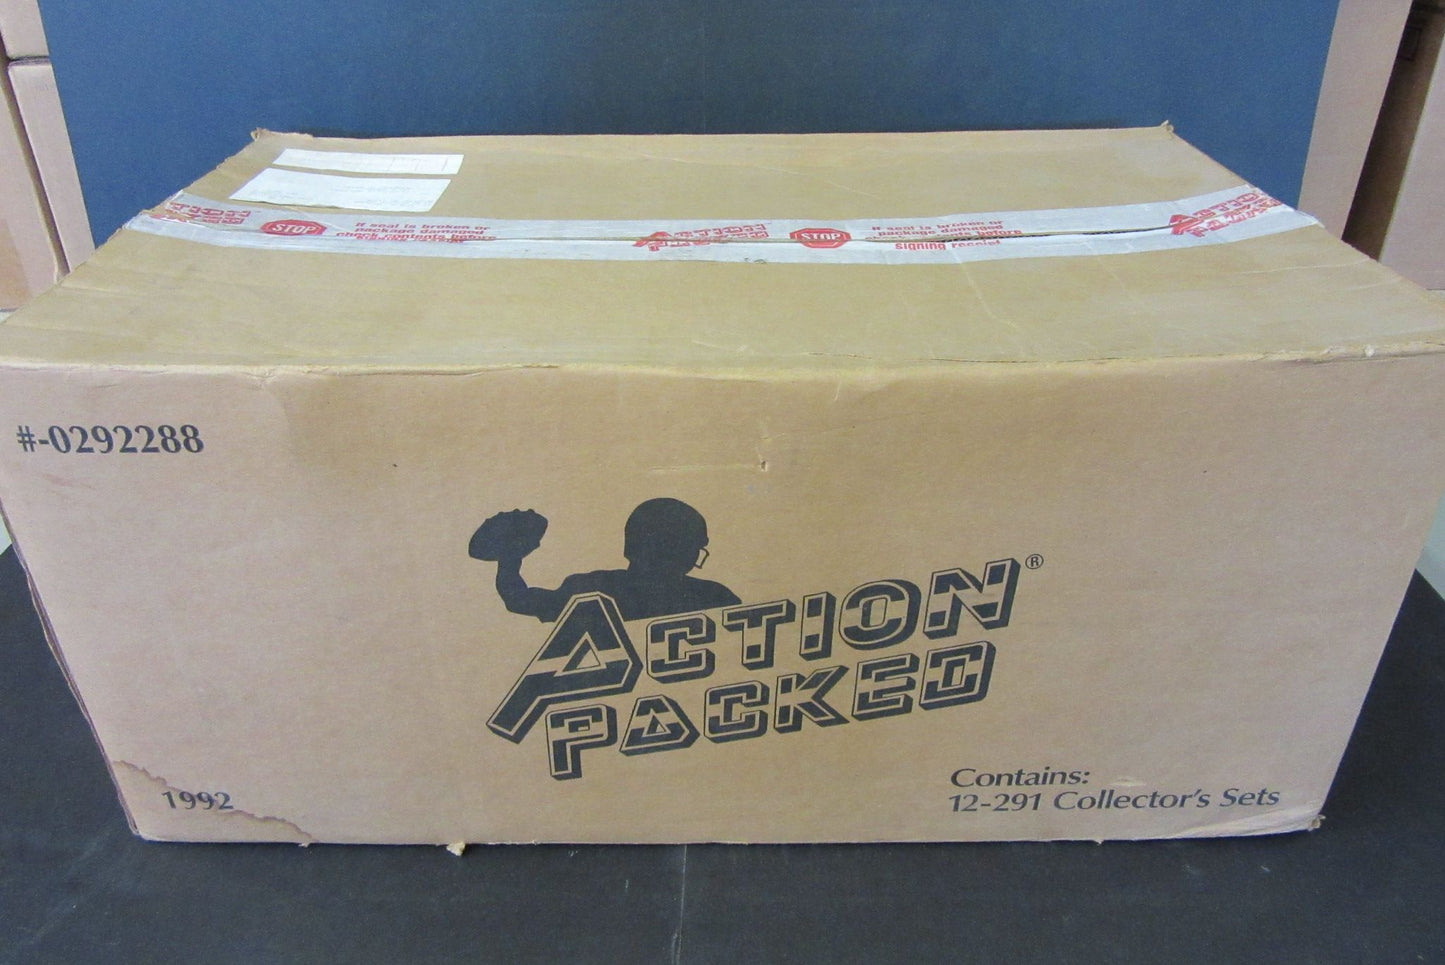 1992 Action Packed Football Factory Set Case (12 Sets) (0292288)